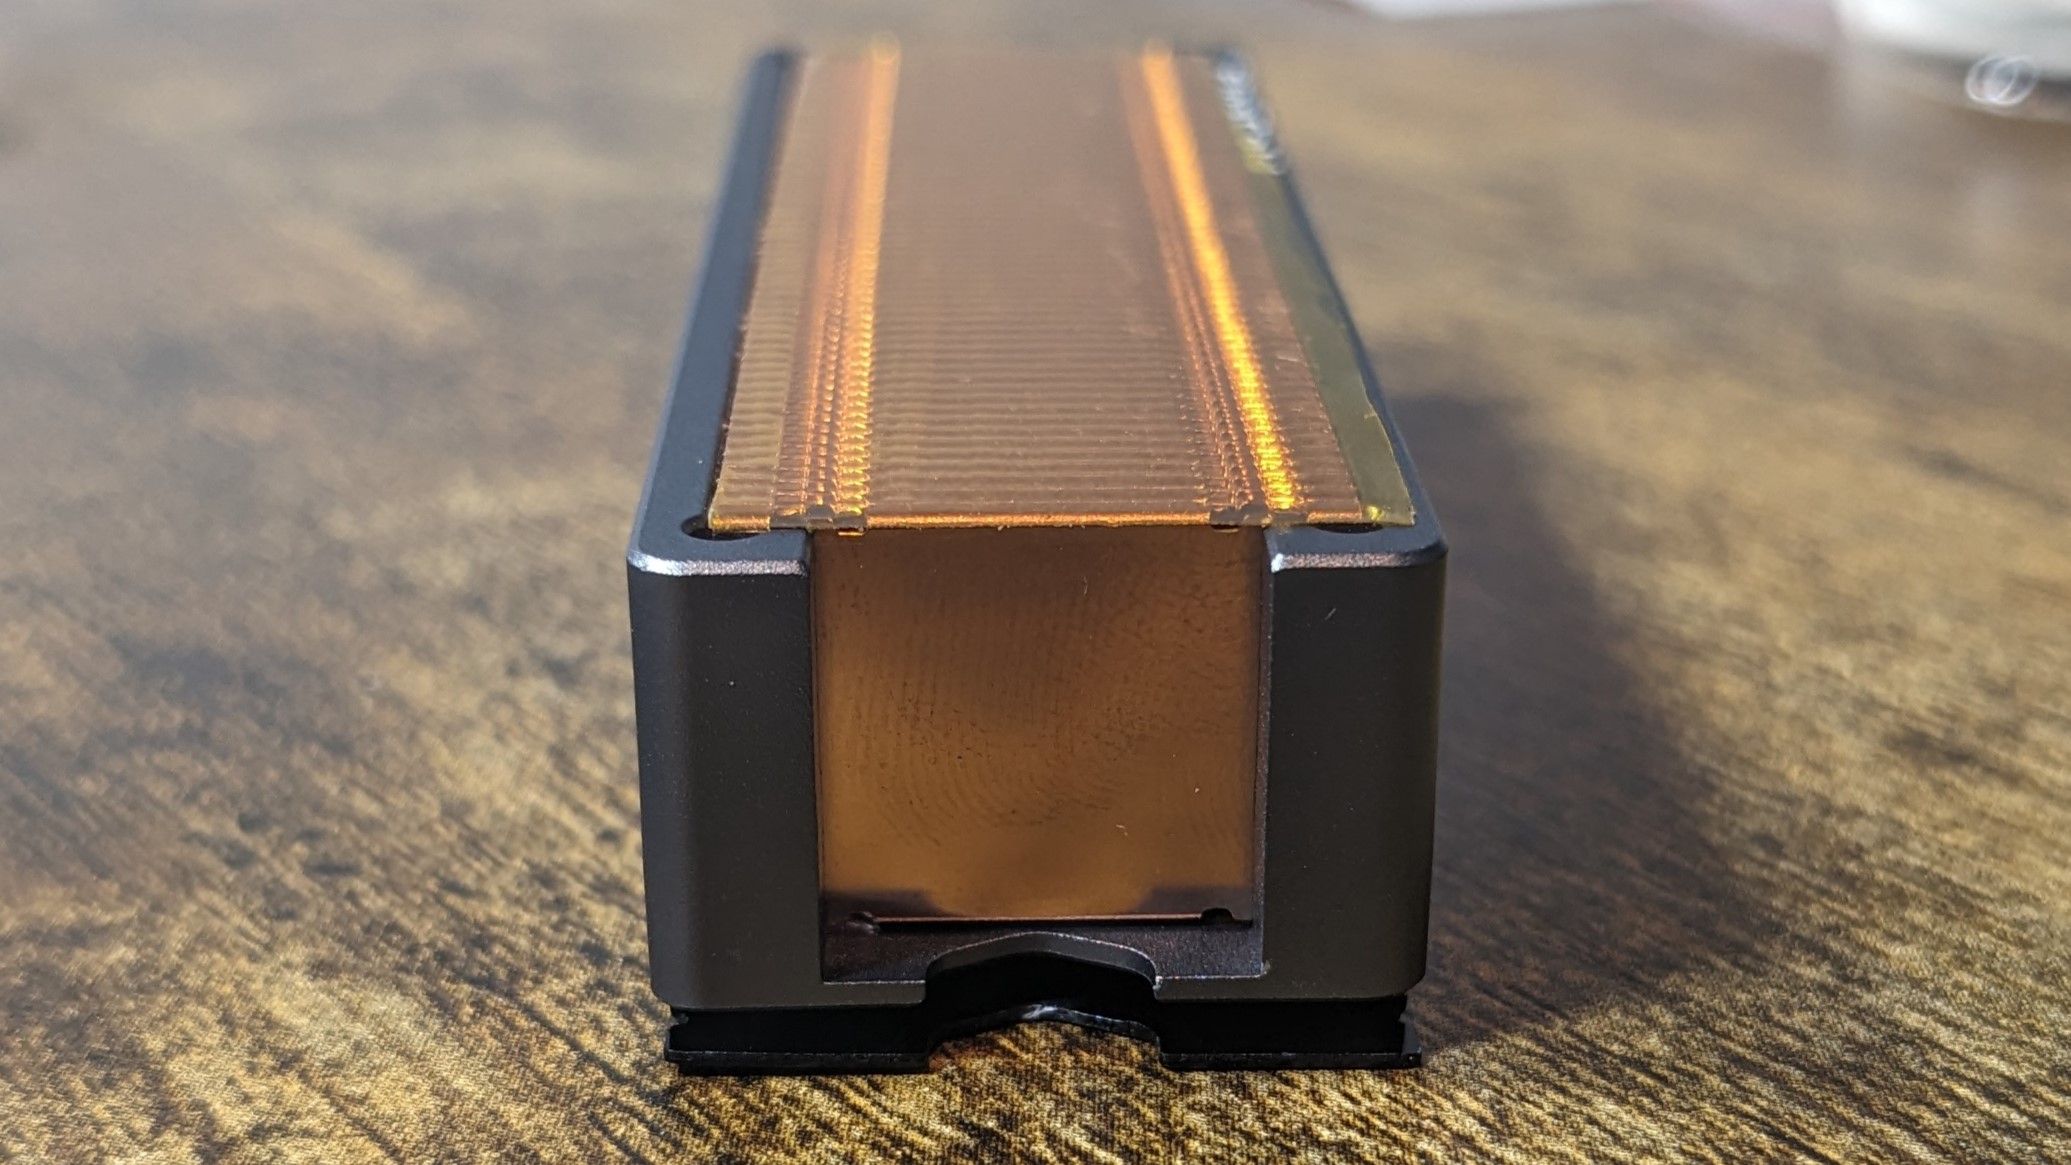 All Copper Design and a low profile: Jeyi FinsCold Q150 m.2 Heatsink Review